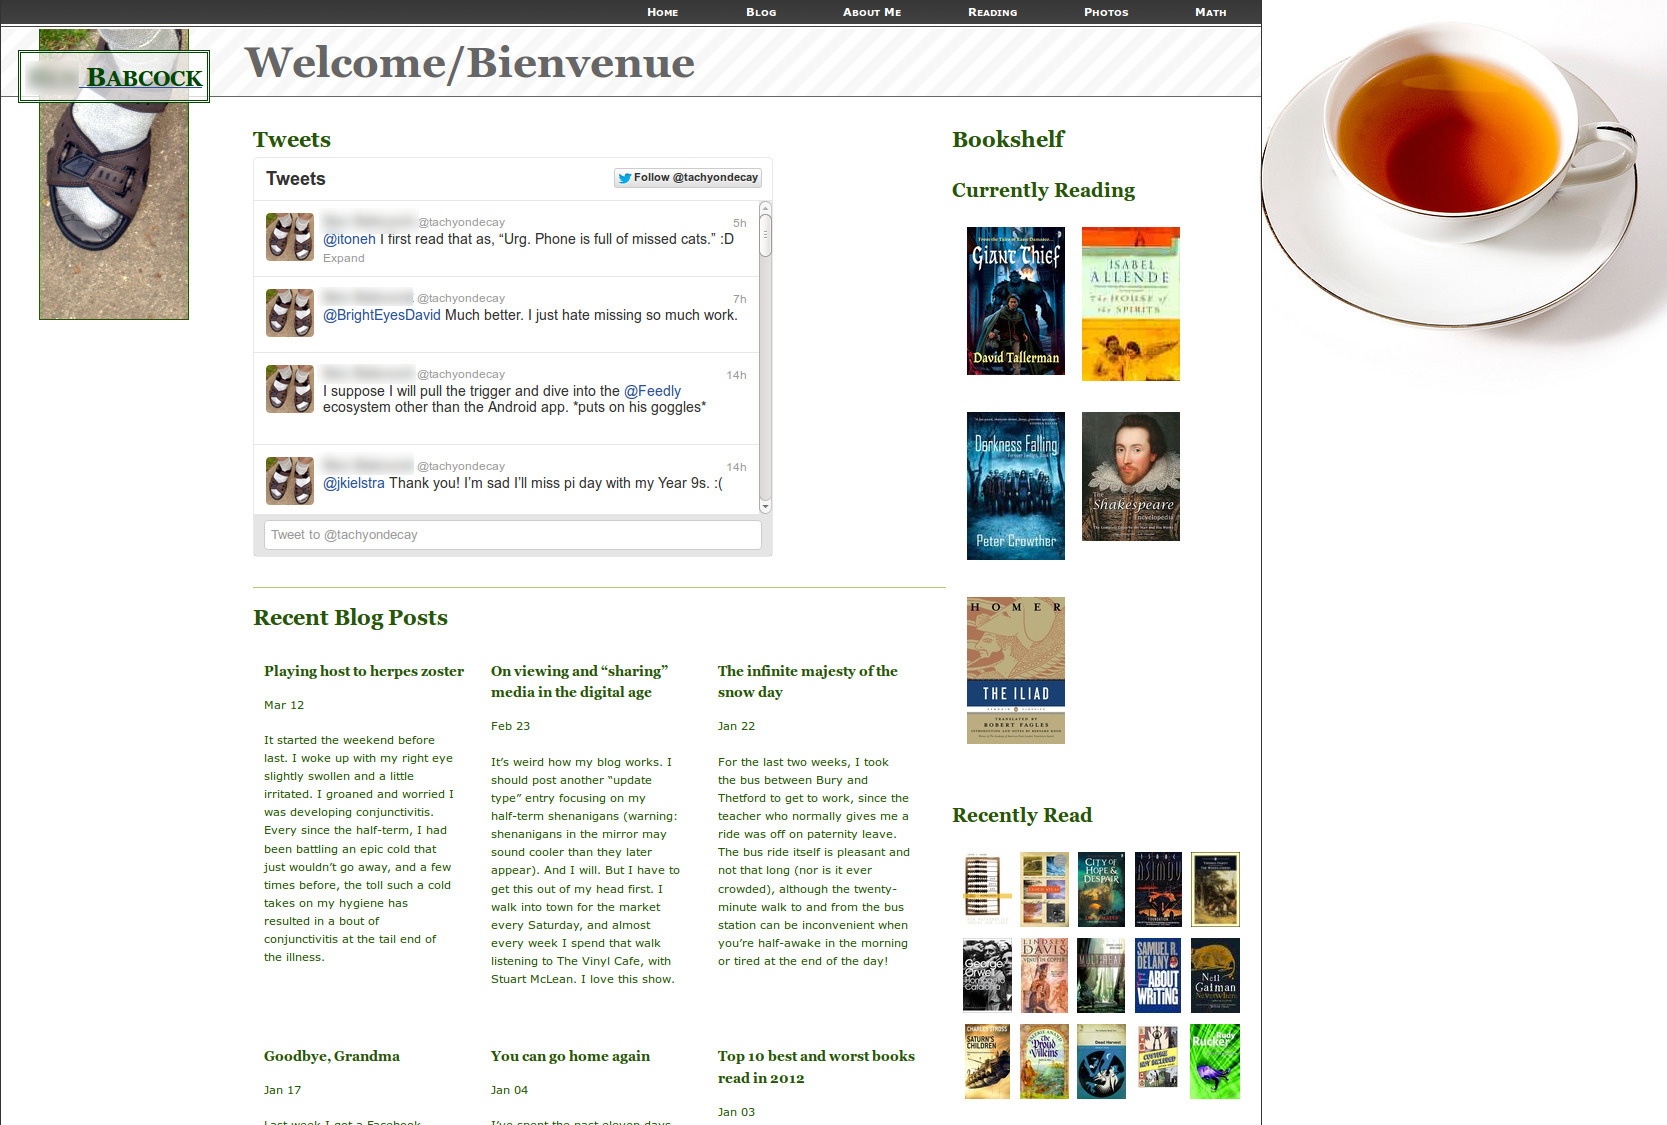 Screenshot of the homepage of my website from 2013. Socks and sandals on a vertical rectangular banner at the top left. The text is green on a beige background. There is a cup of tea in the top right corner.